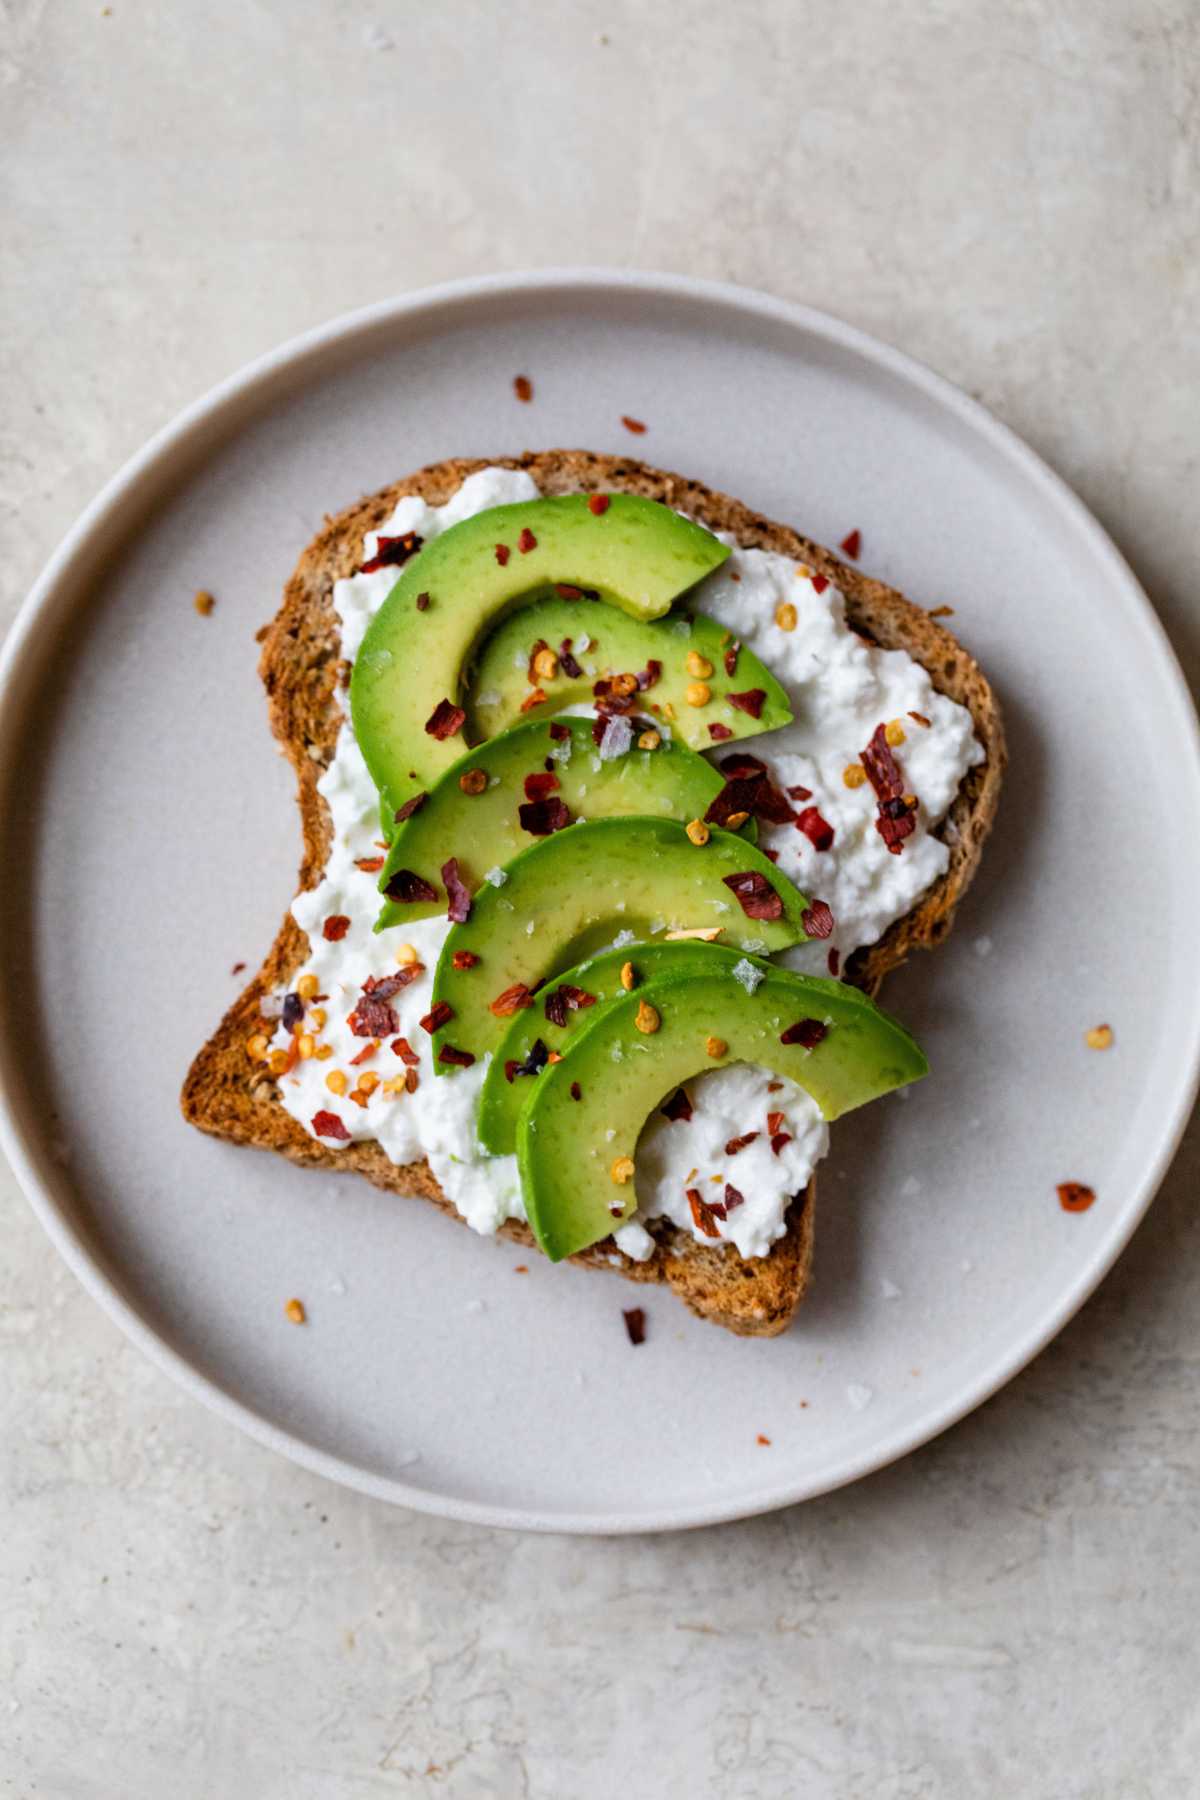 Toast topped with cottage cheese, avocado and red pepper flakes.